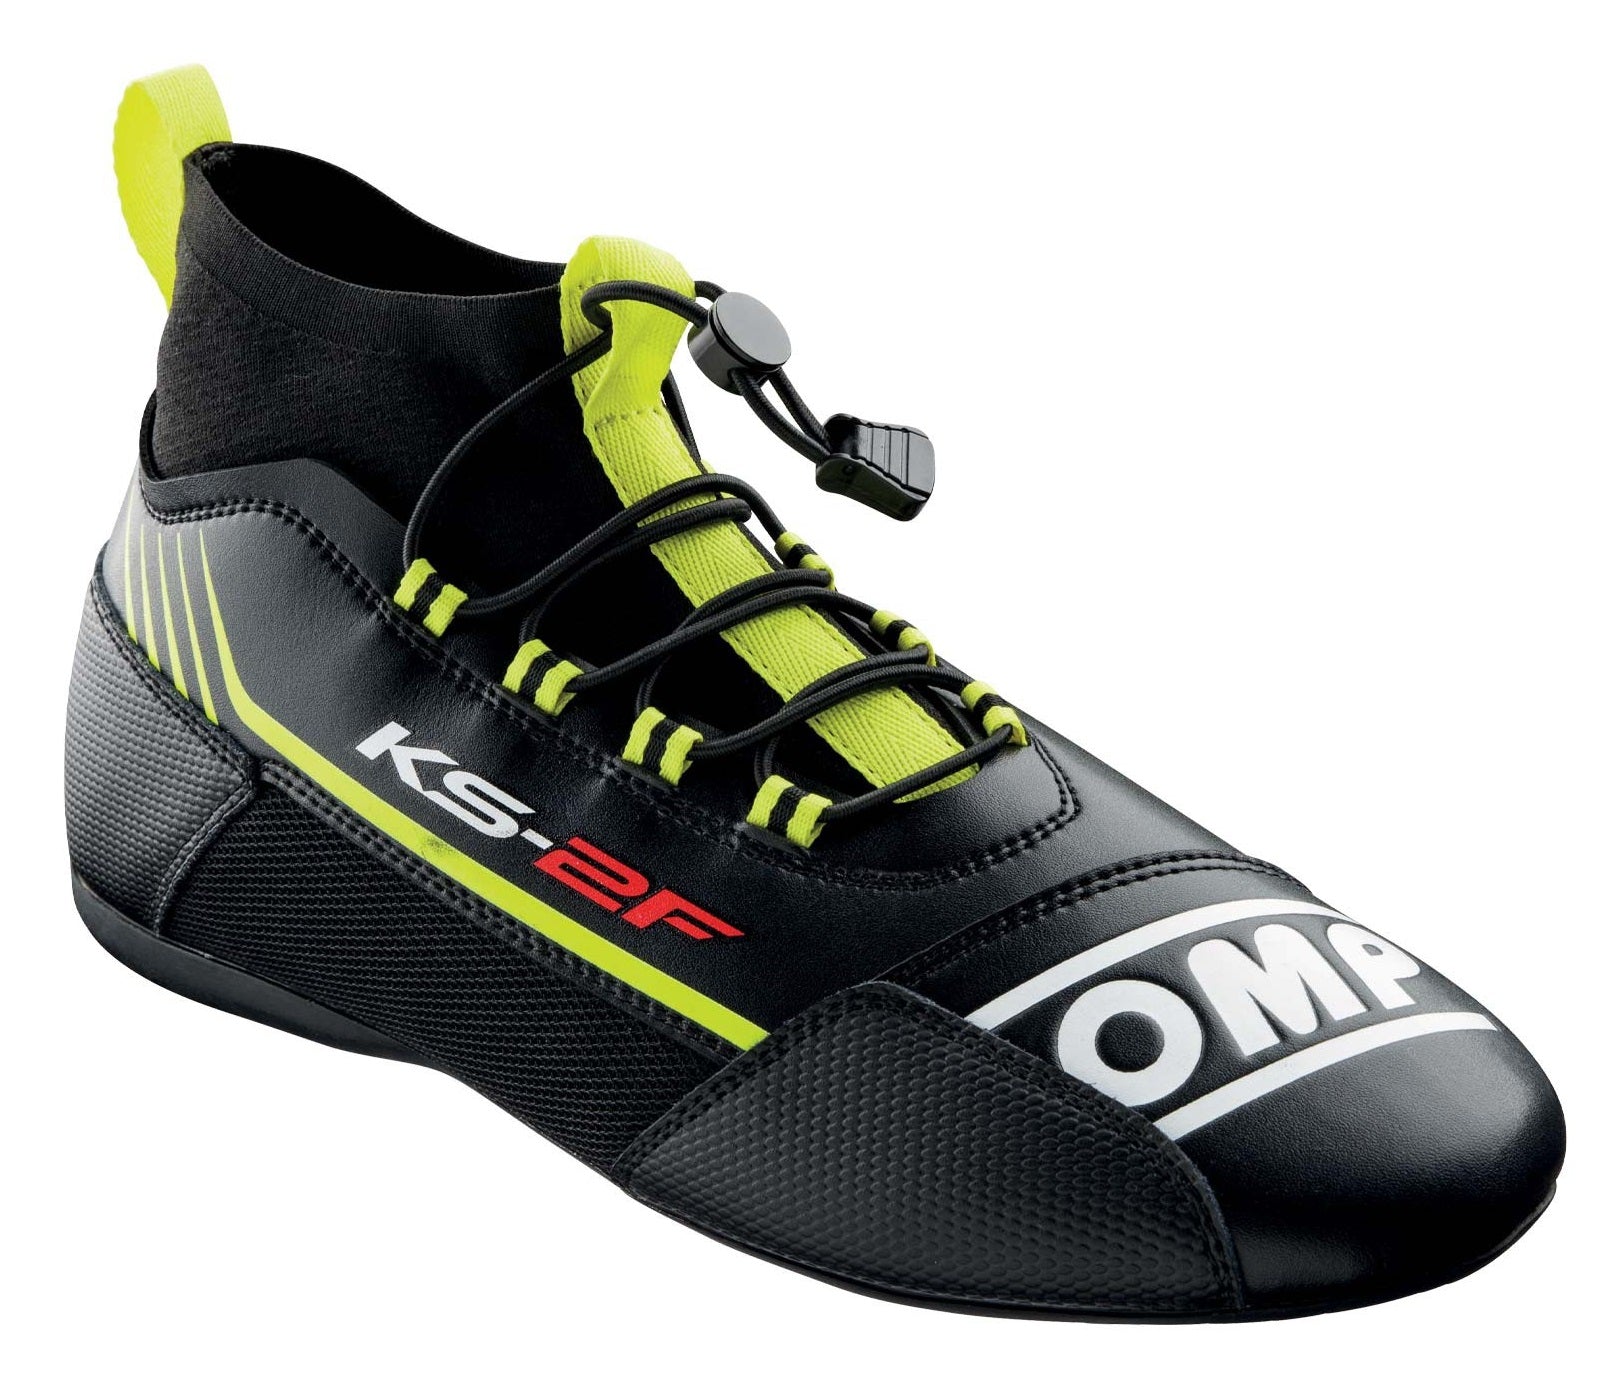 OMP KC0-0830-A01-178-46 KS-2F Karting shoes, black/fluo yellow, size 46 Photo-0 